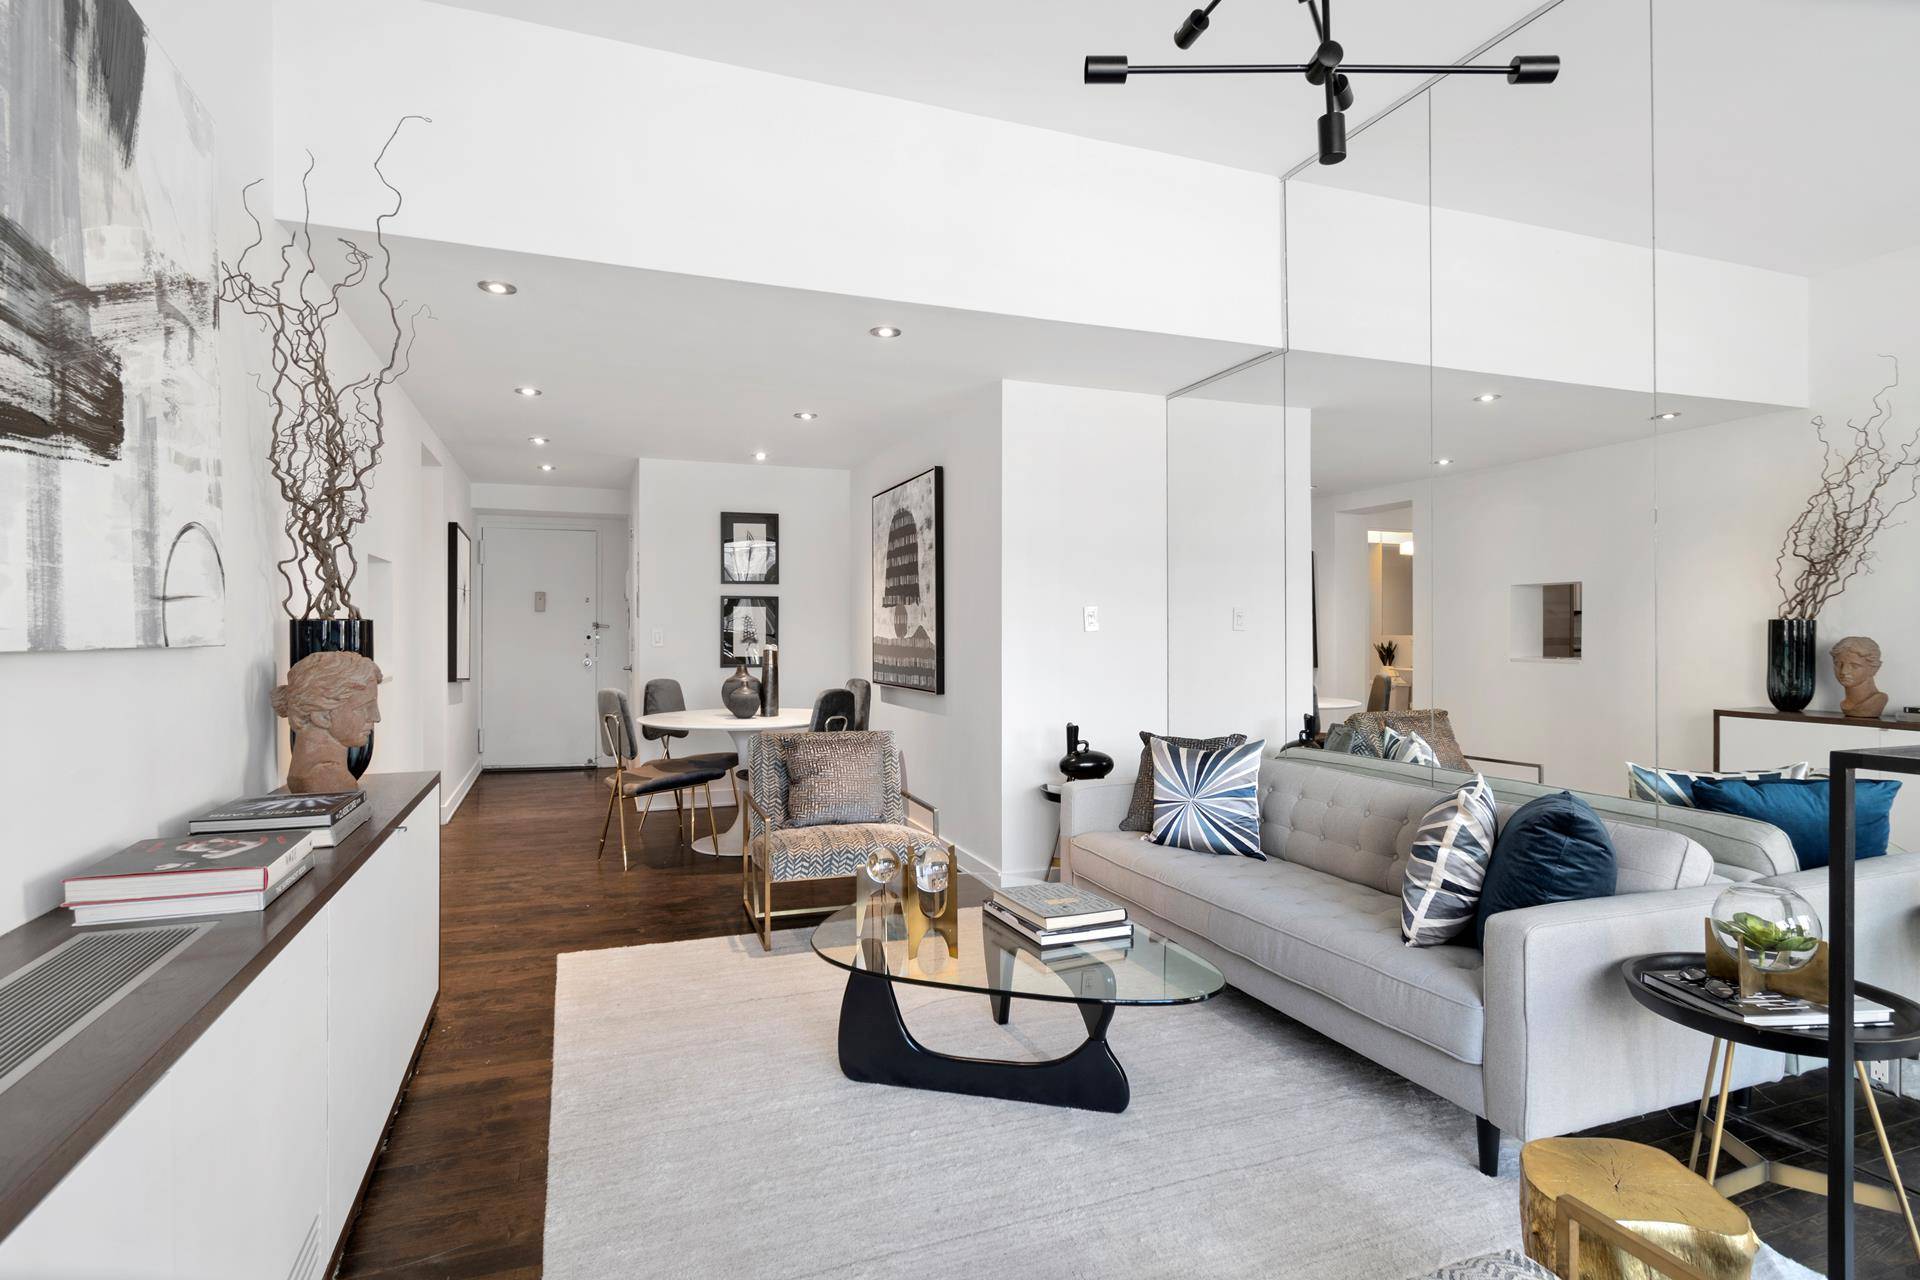 Centrally located at the intersection of some of NYC's most vibrant neighborhoods, this unique and beautifully maintained duplex apartment features one bedroom and two full bathrooms.